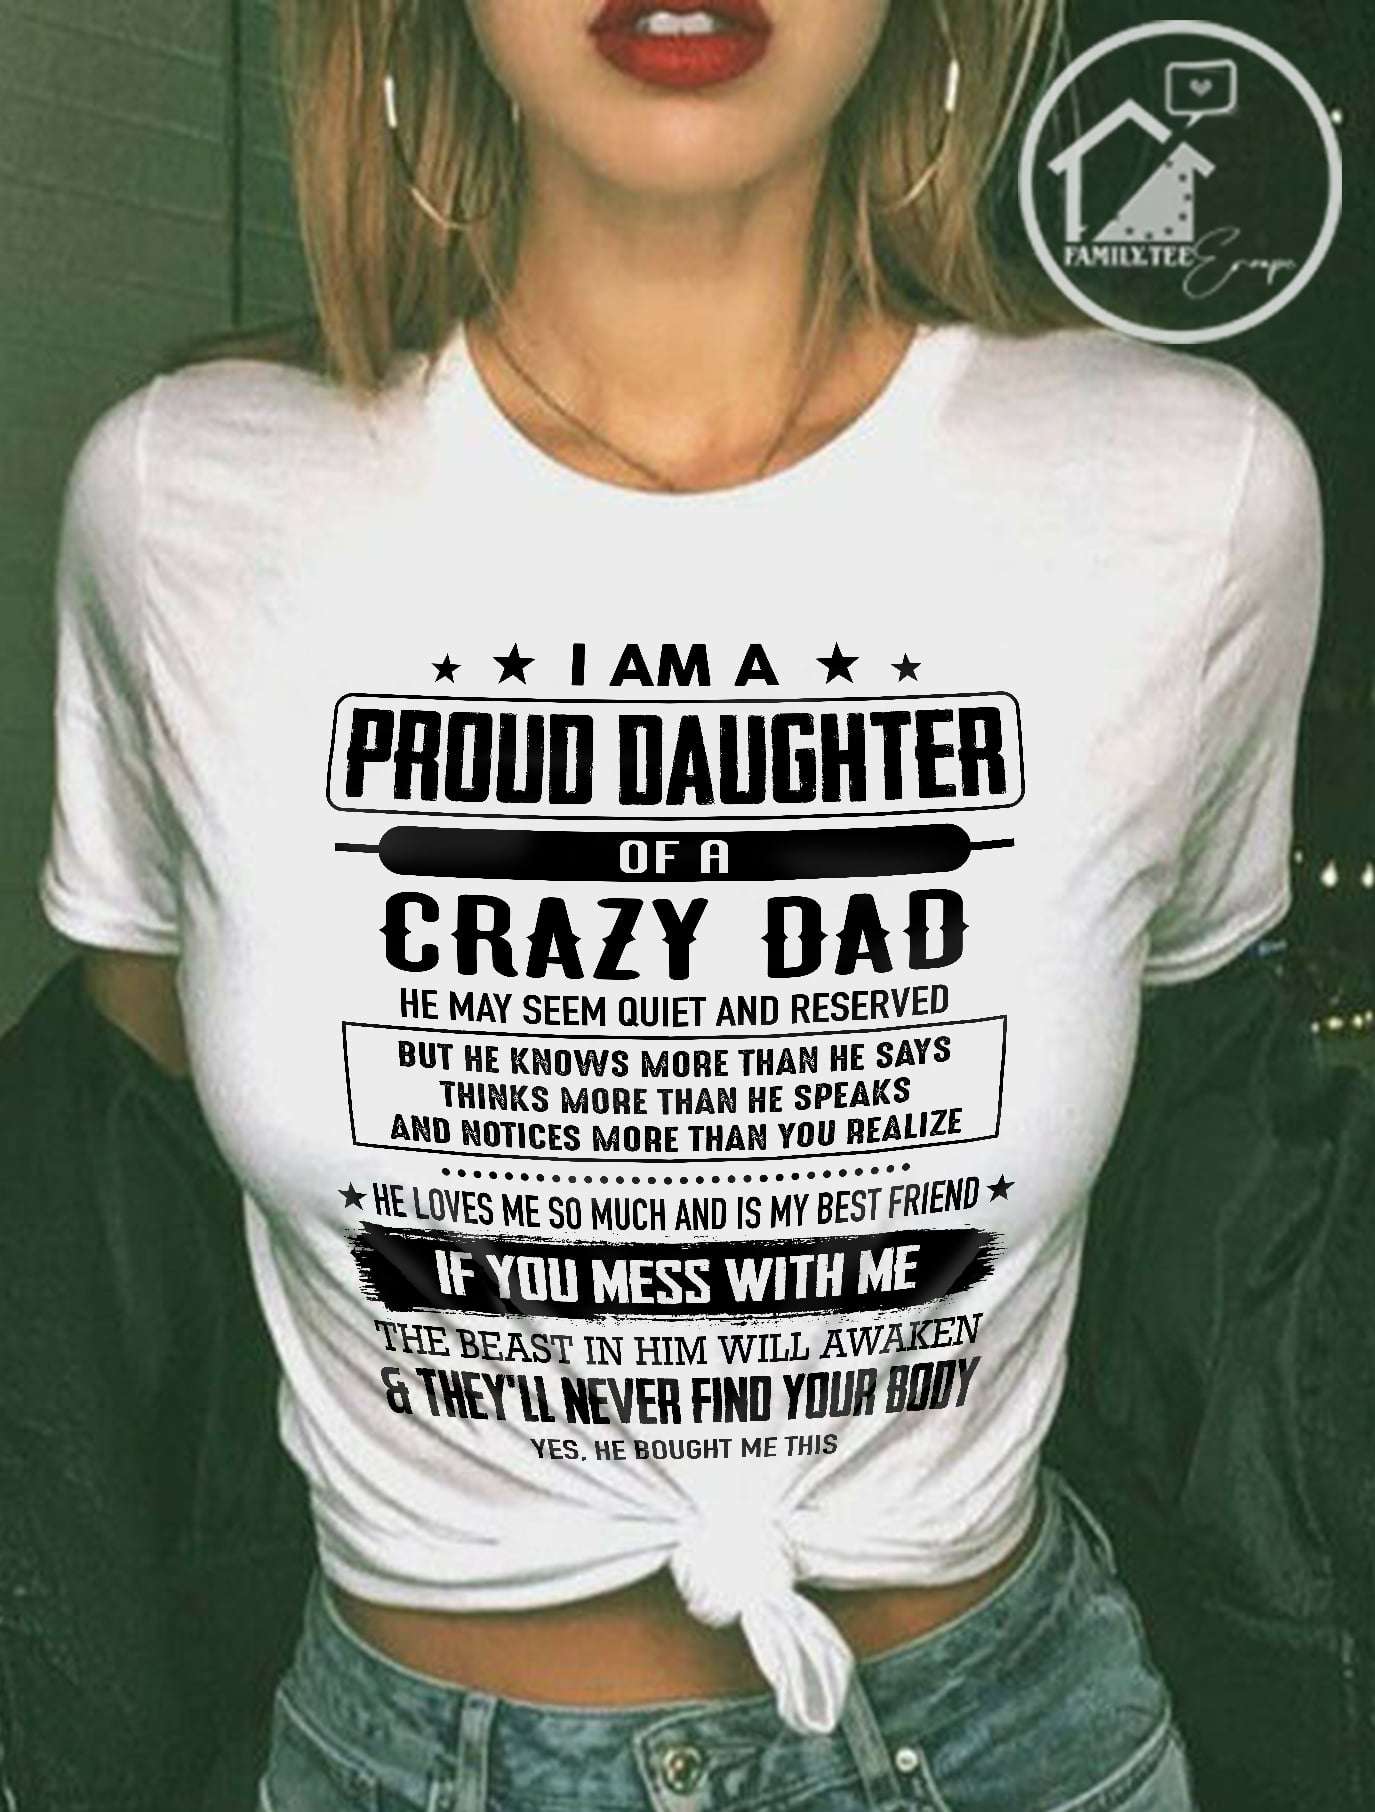 I am a proud daughter of a crazy dad he may seem quiet and reserved he loves me so much and is my friend